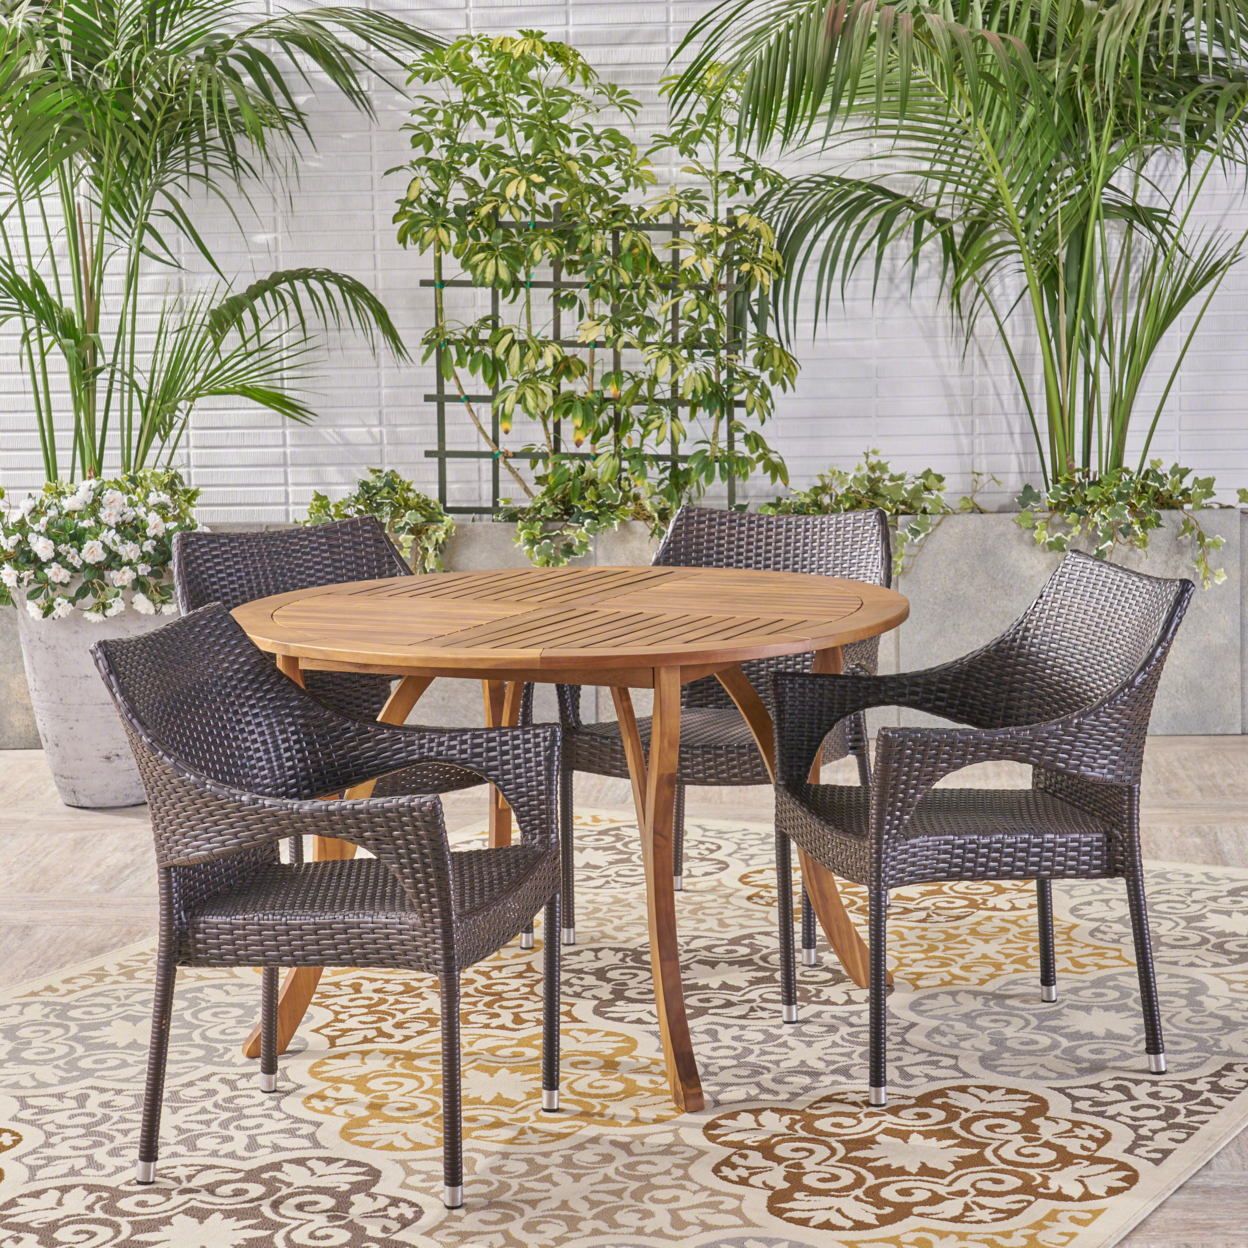 Baish Outdoor 5 Piece Acacia Wood And Wicker Dining Set - Brown